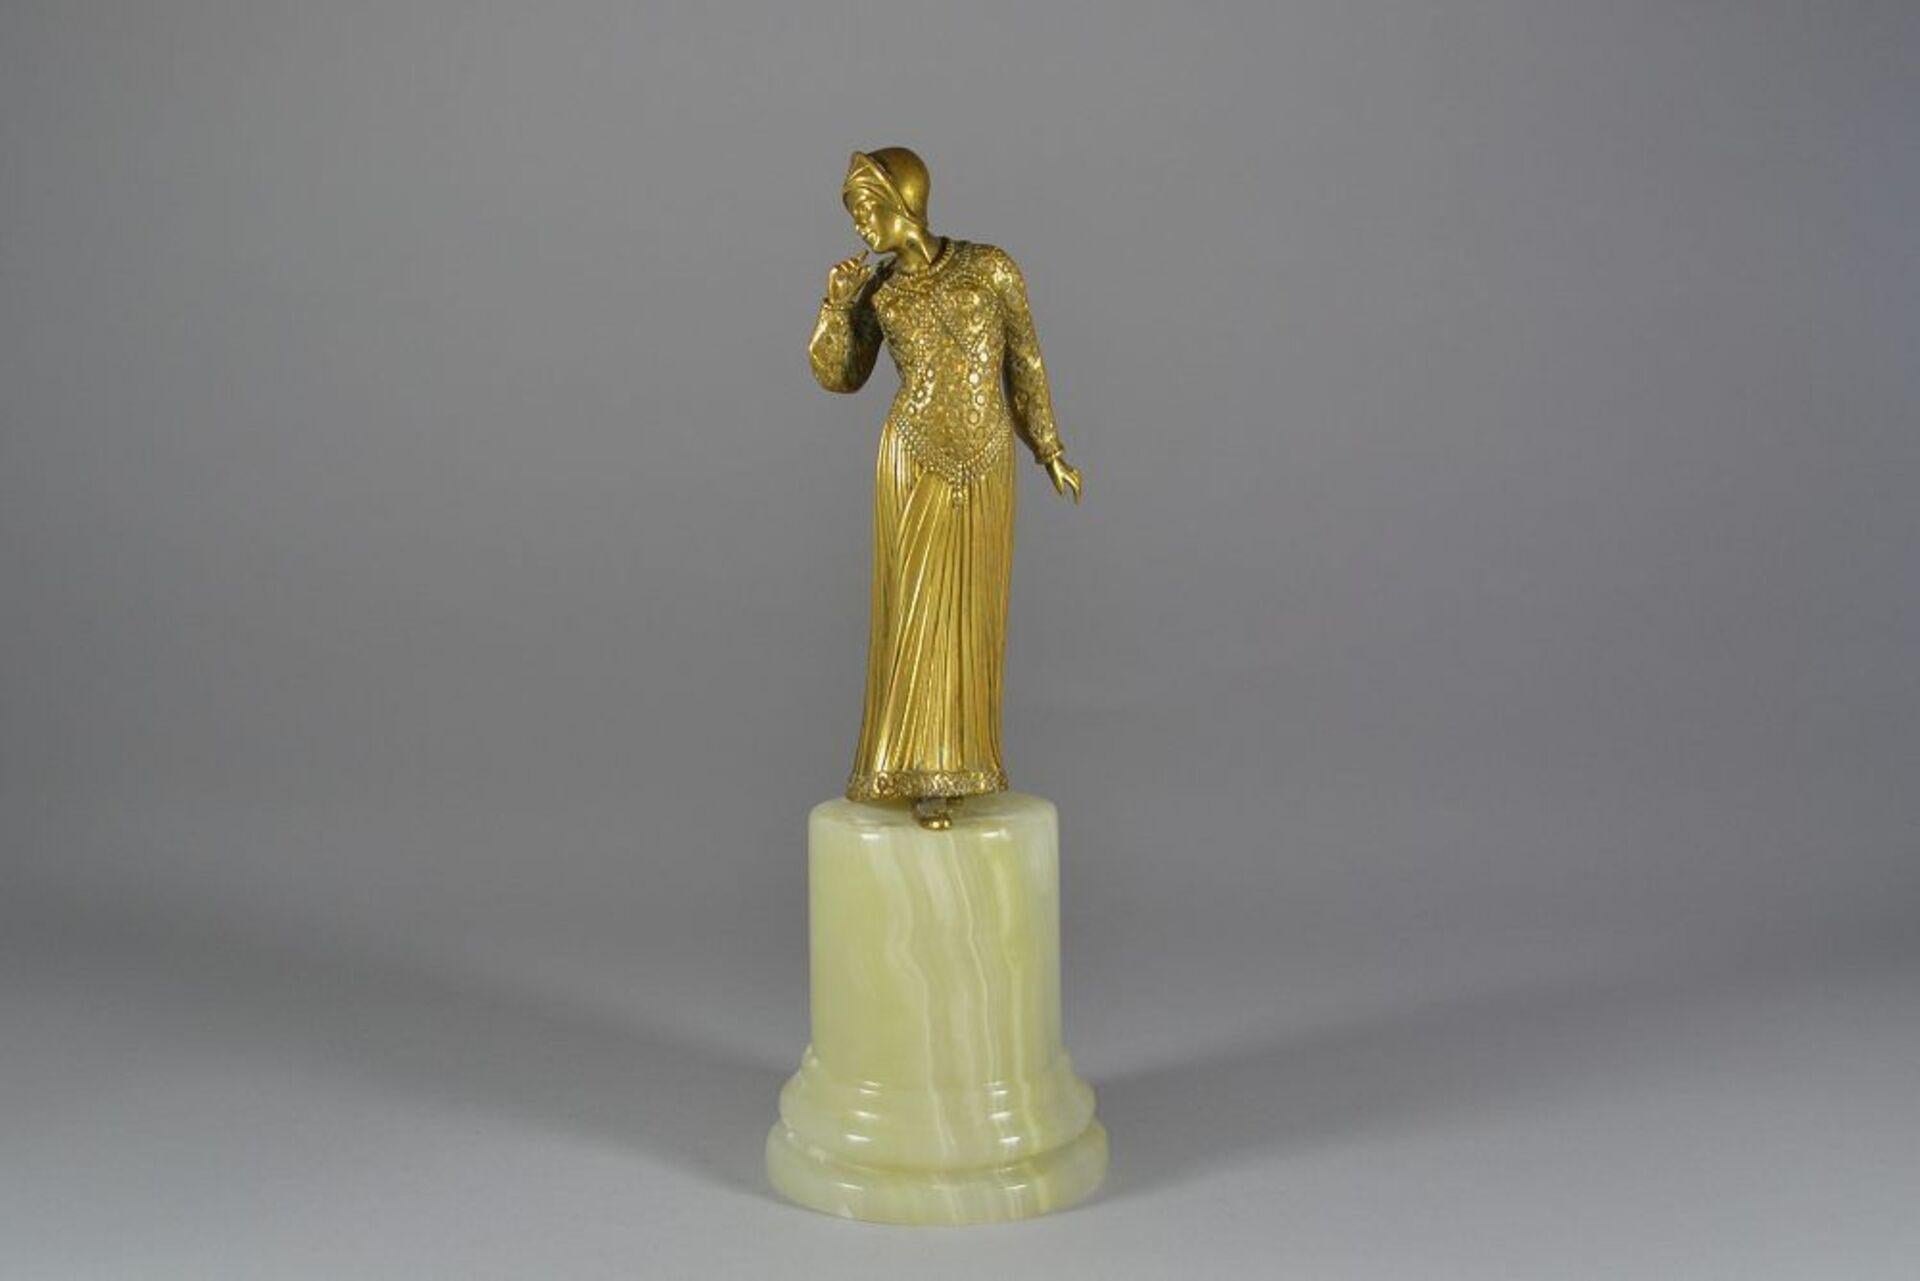 Bronze elegant lady on an onyx base.
Very high quality foundry and chasing.
Excellent condition.
French. Circa 1930.
29cm high.